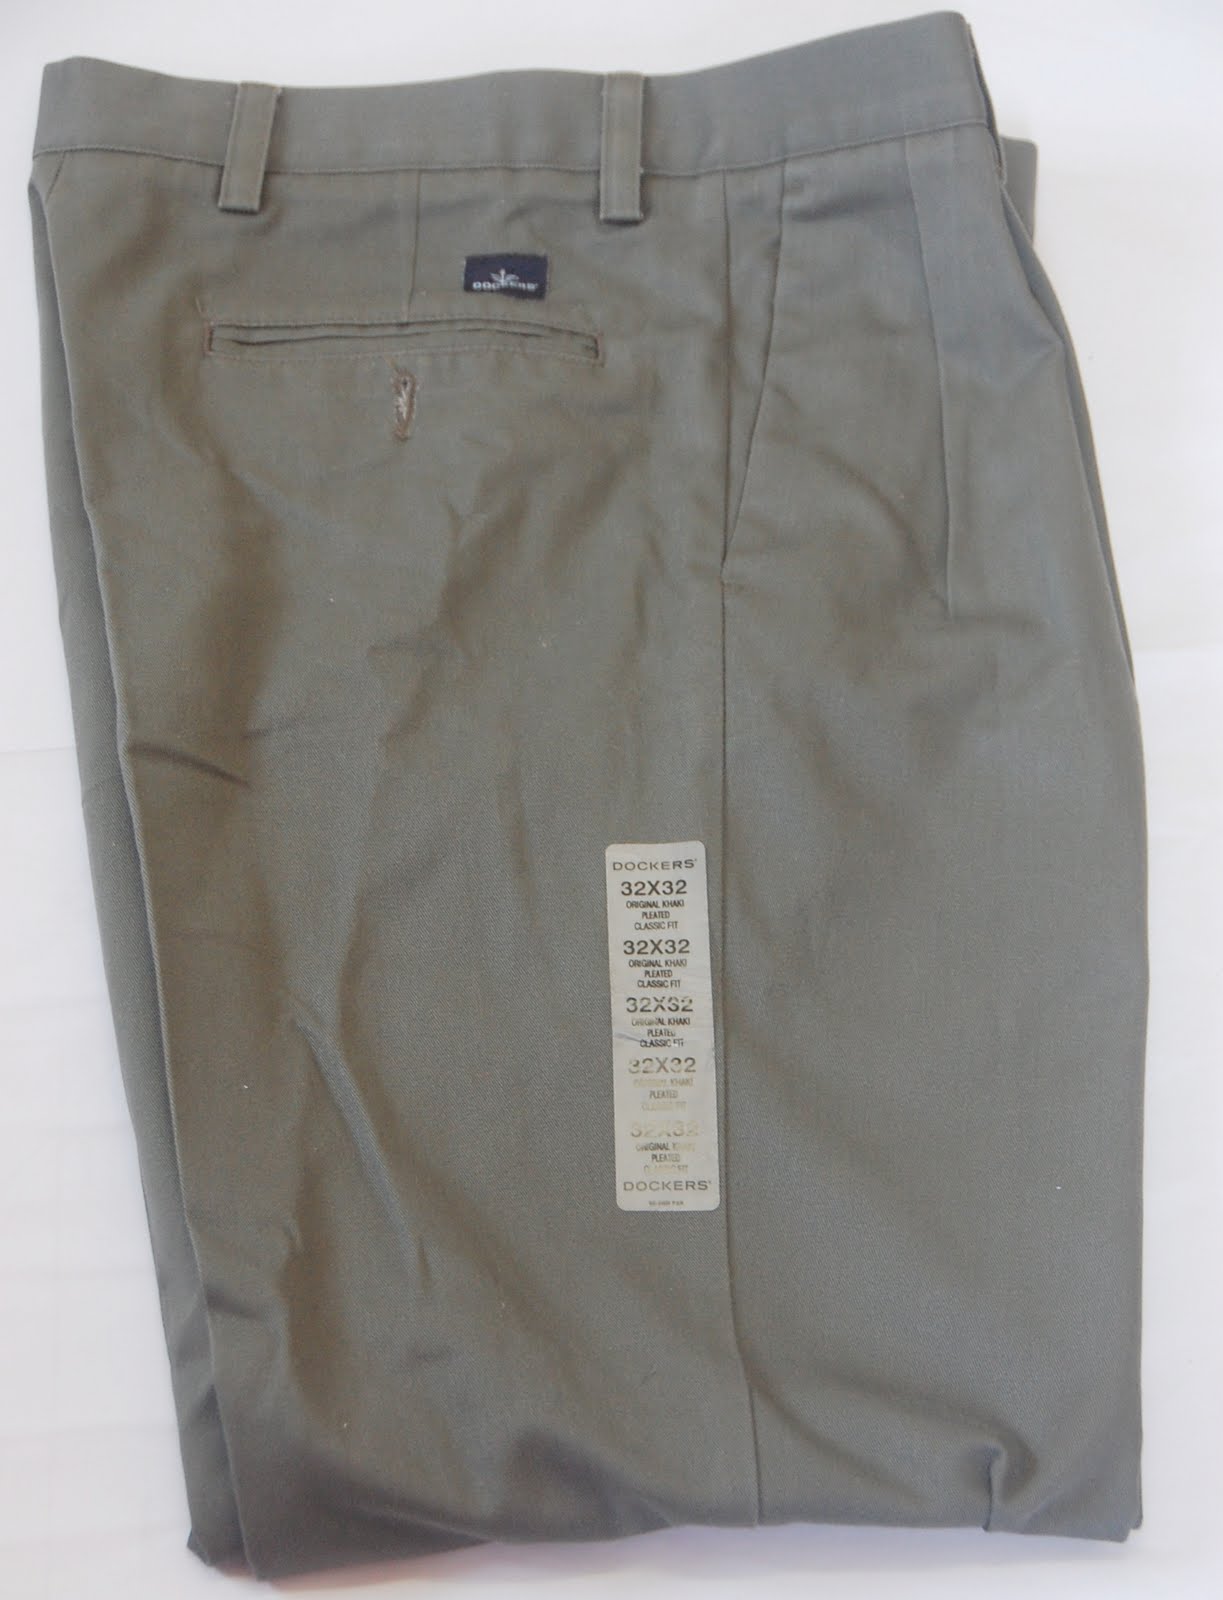 From USA with Love: DOCKERS ORIGINAL KHAKI PLEATED CLASSIC FIT!!!